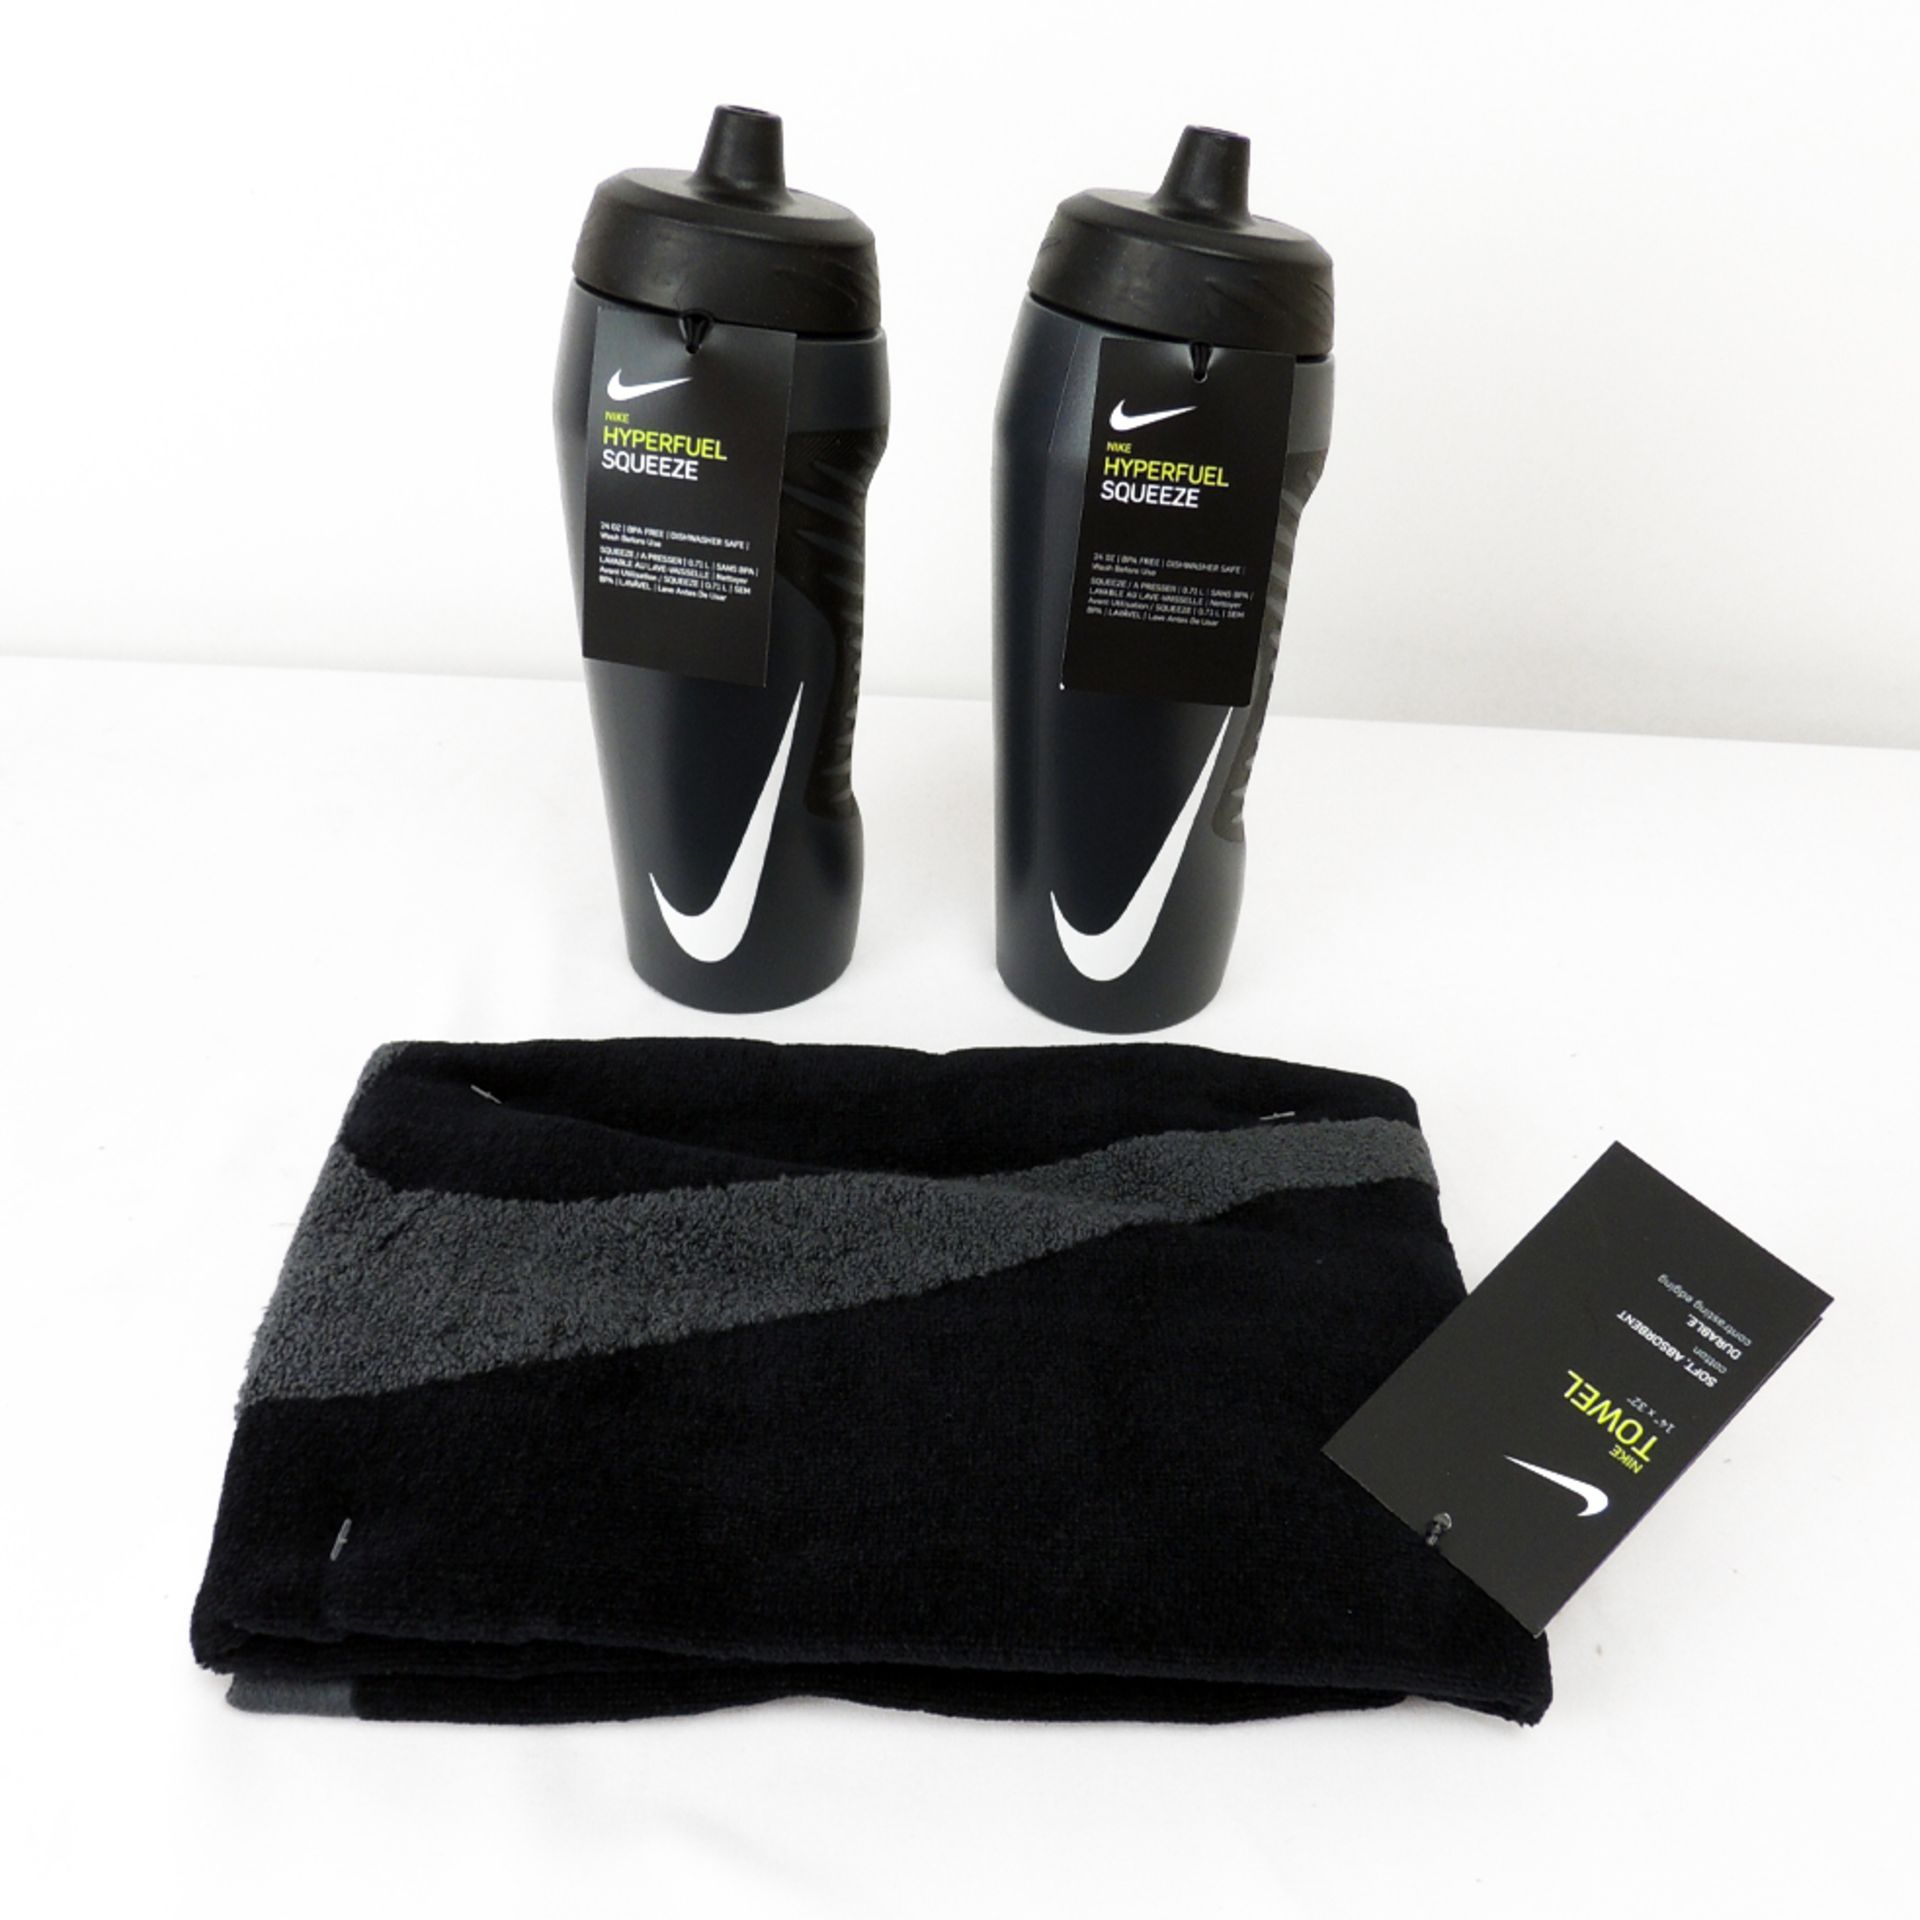 A bagged as new Nike Towel in Black and two Nike Hyperfuel squeeze 24oz in black